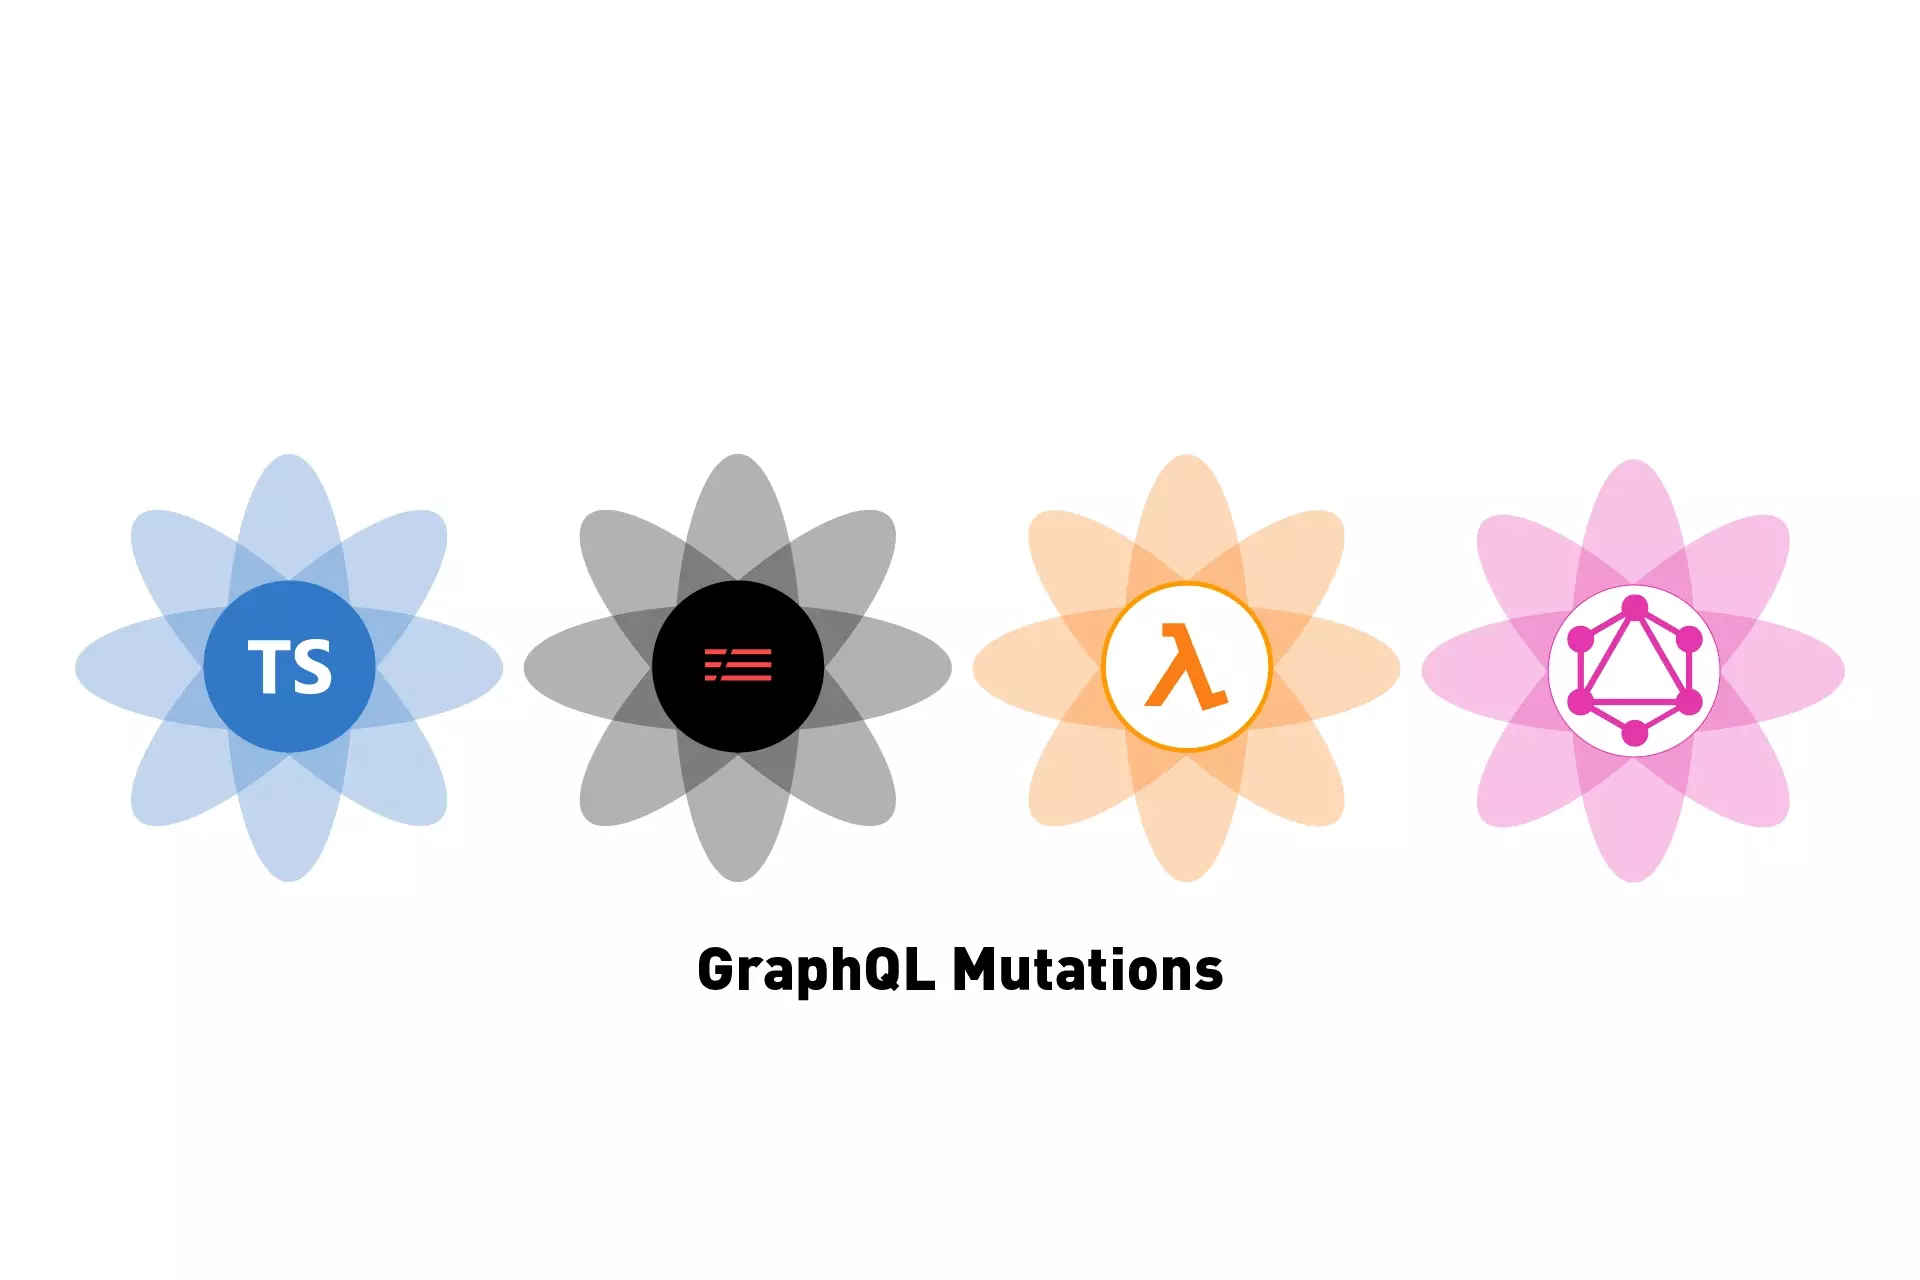 Four flowers that represent Typescript, Serverless, AWS Lambda and GraphQL side by side. Beneath them sits the text "GraphQL Mutations."